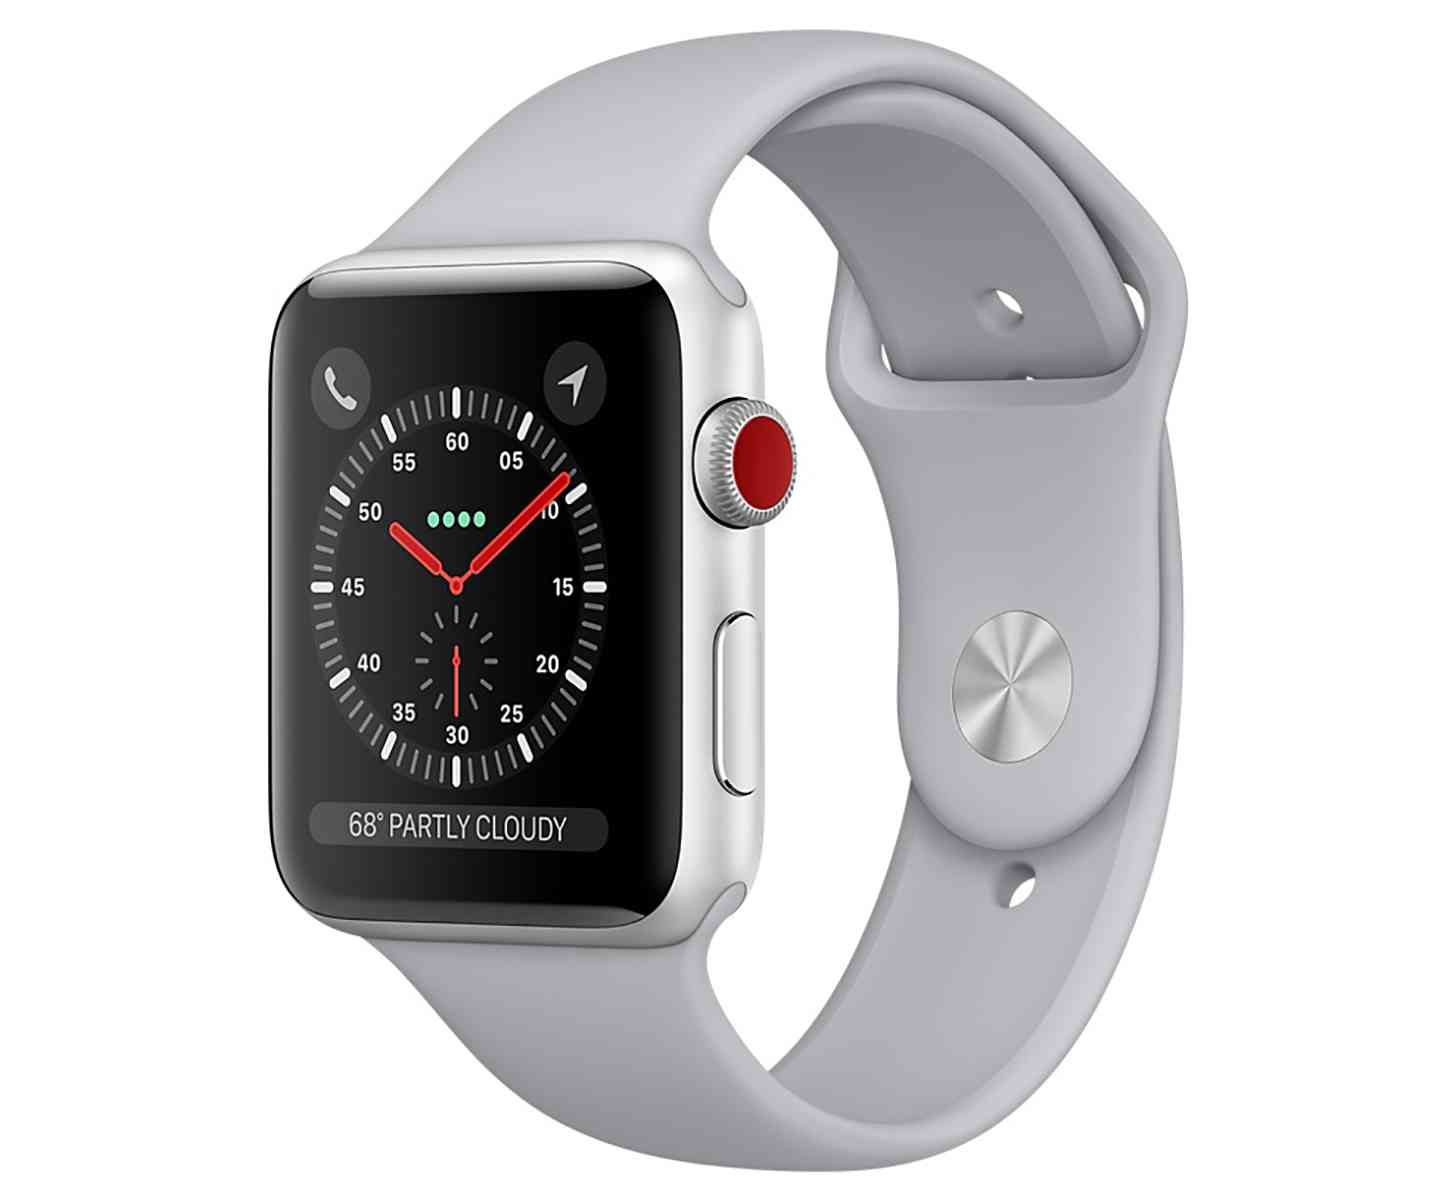 Apple Watch Series 3 official large